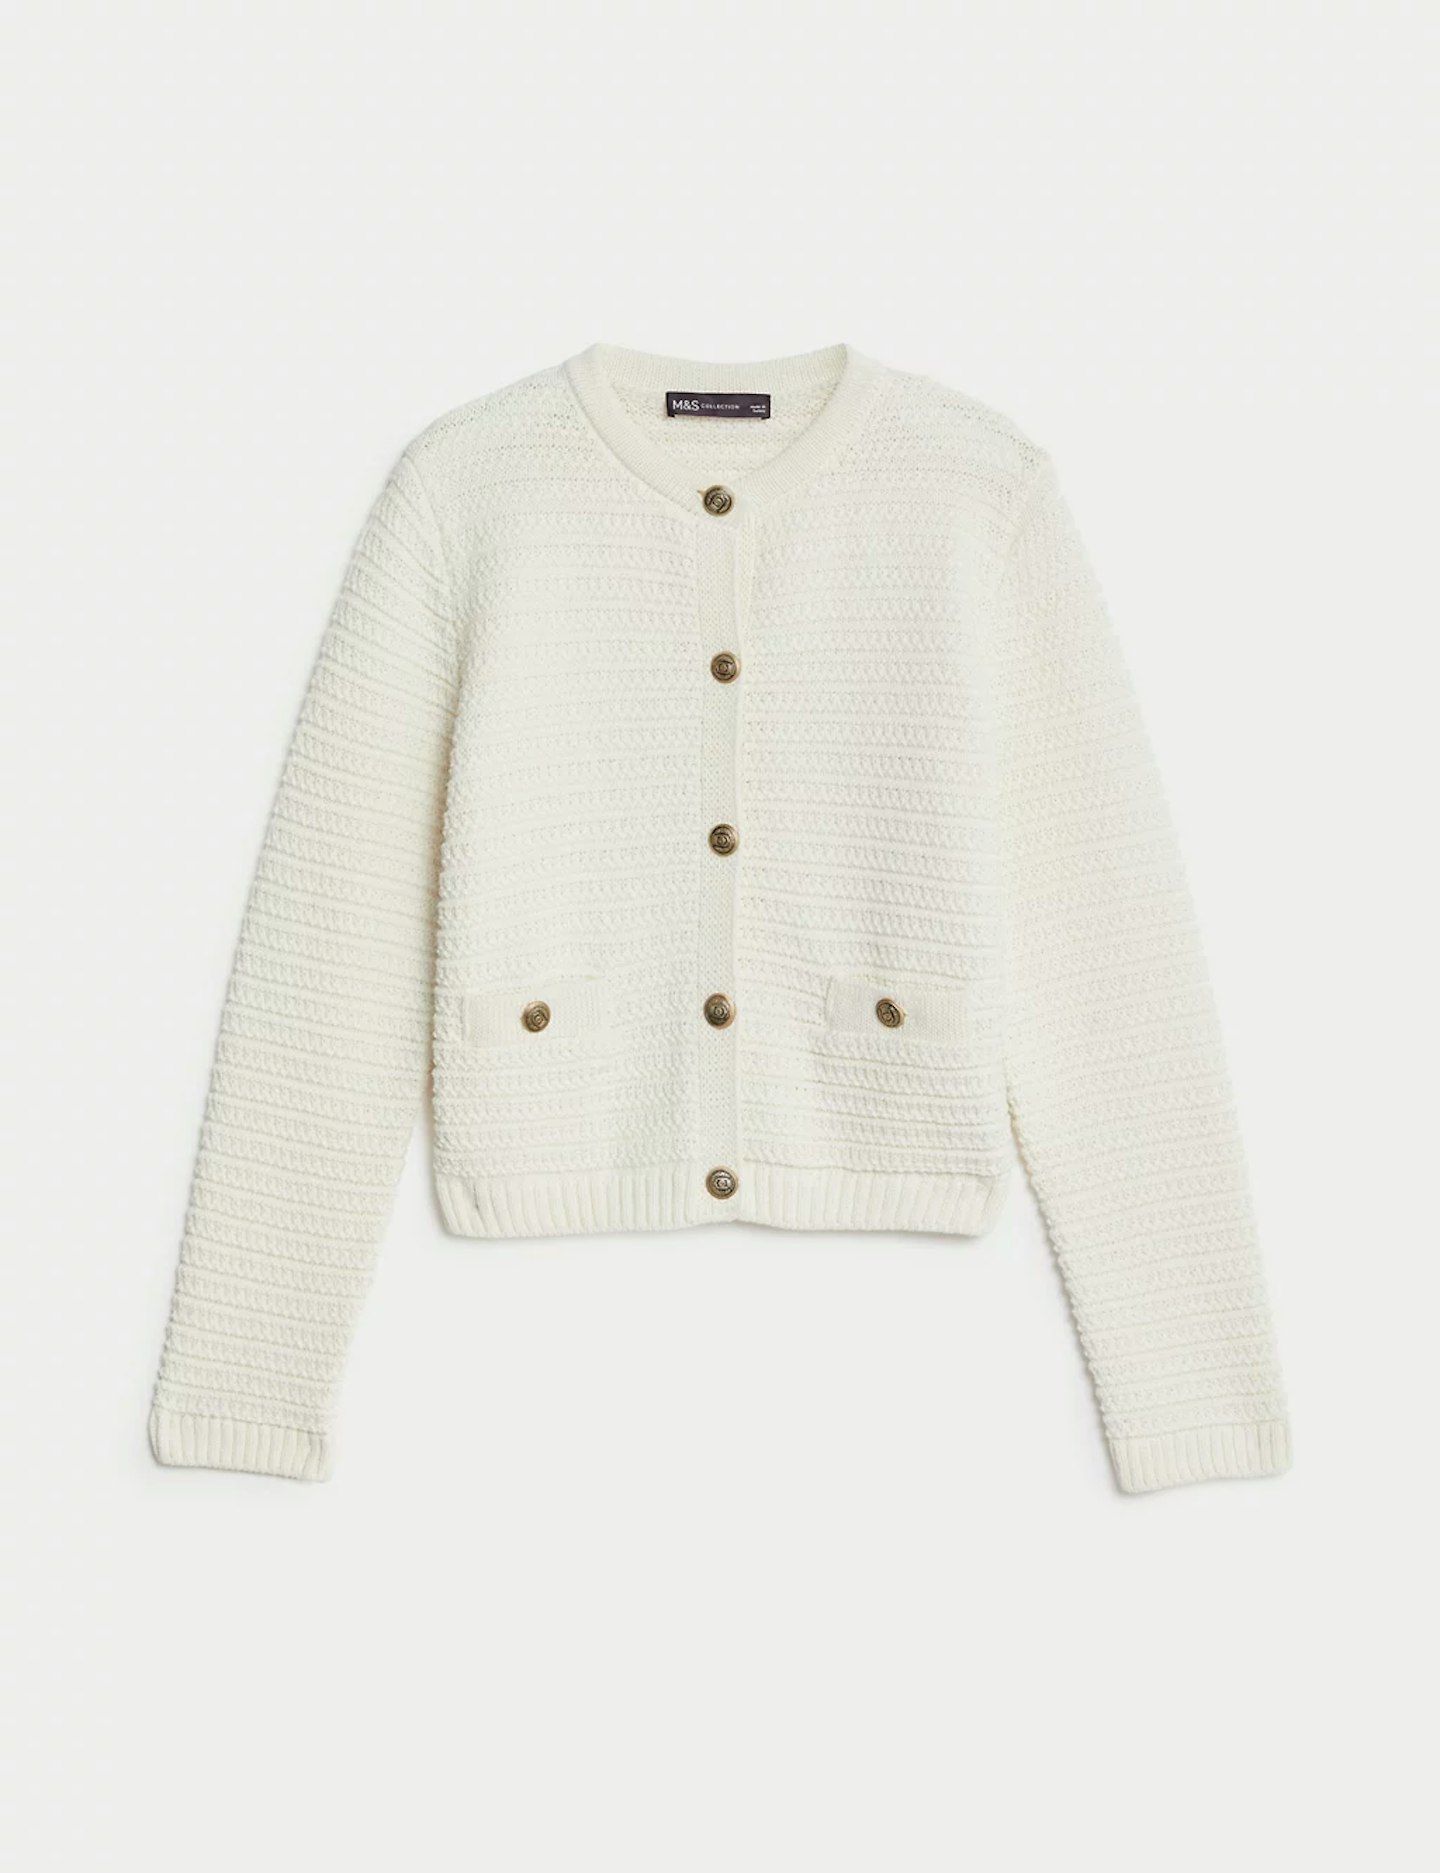 M&S, Cotton-Blend Textured Knitted Jacket